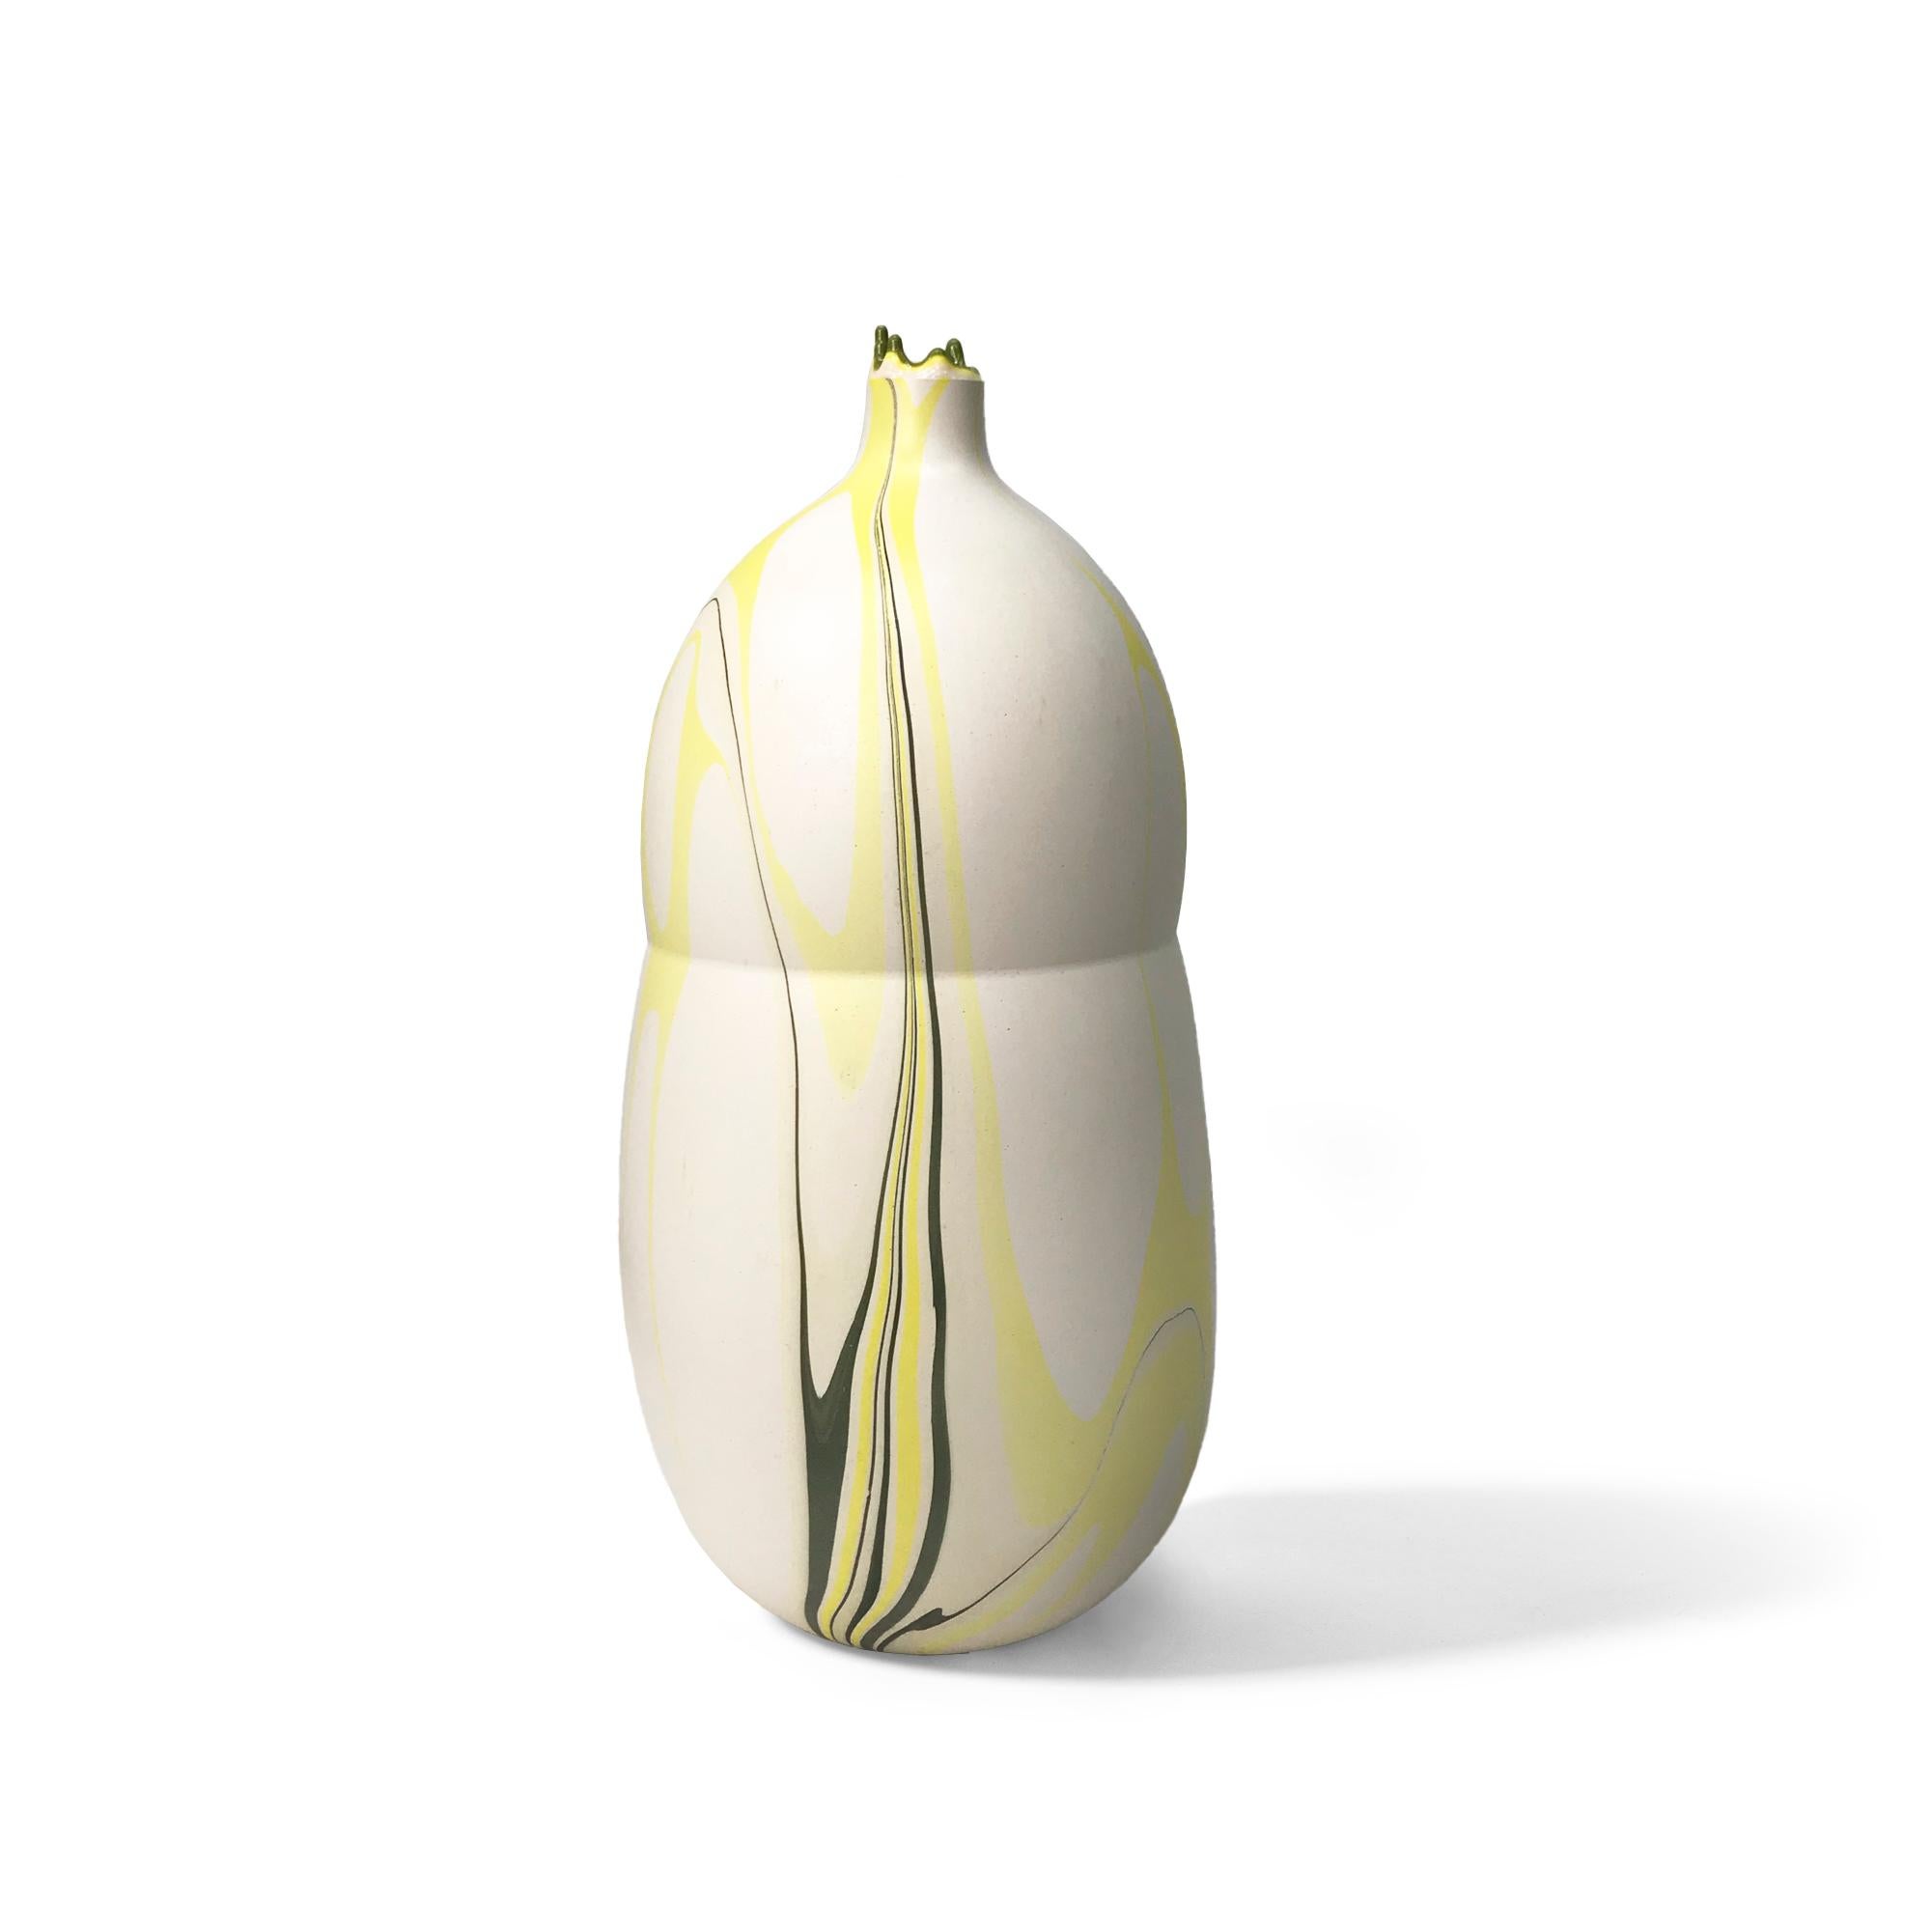 Tethys hourglass hydro vase by Elyse Graham
Dimensions: W 14 x D 14 x H 29 cm
Materials: Plaster, Resin
Molded, dyed, and finished by hand in LA. customization
Available.
All pieces are made to order

Our new Hydro Vases take on a futuristic